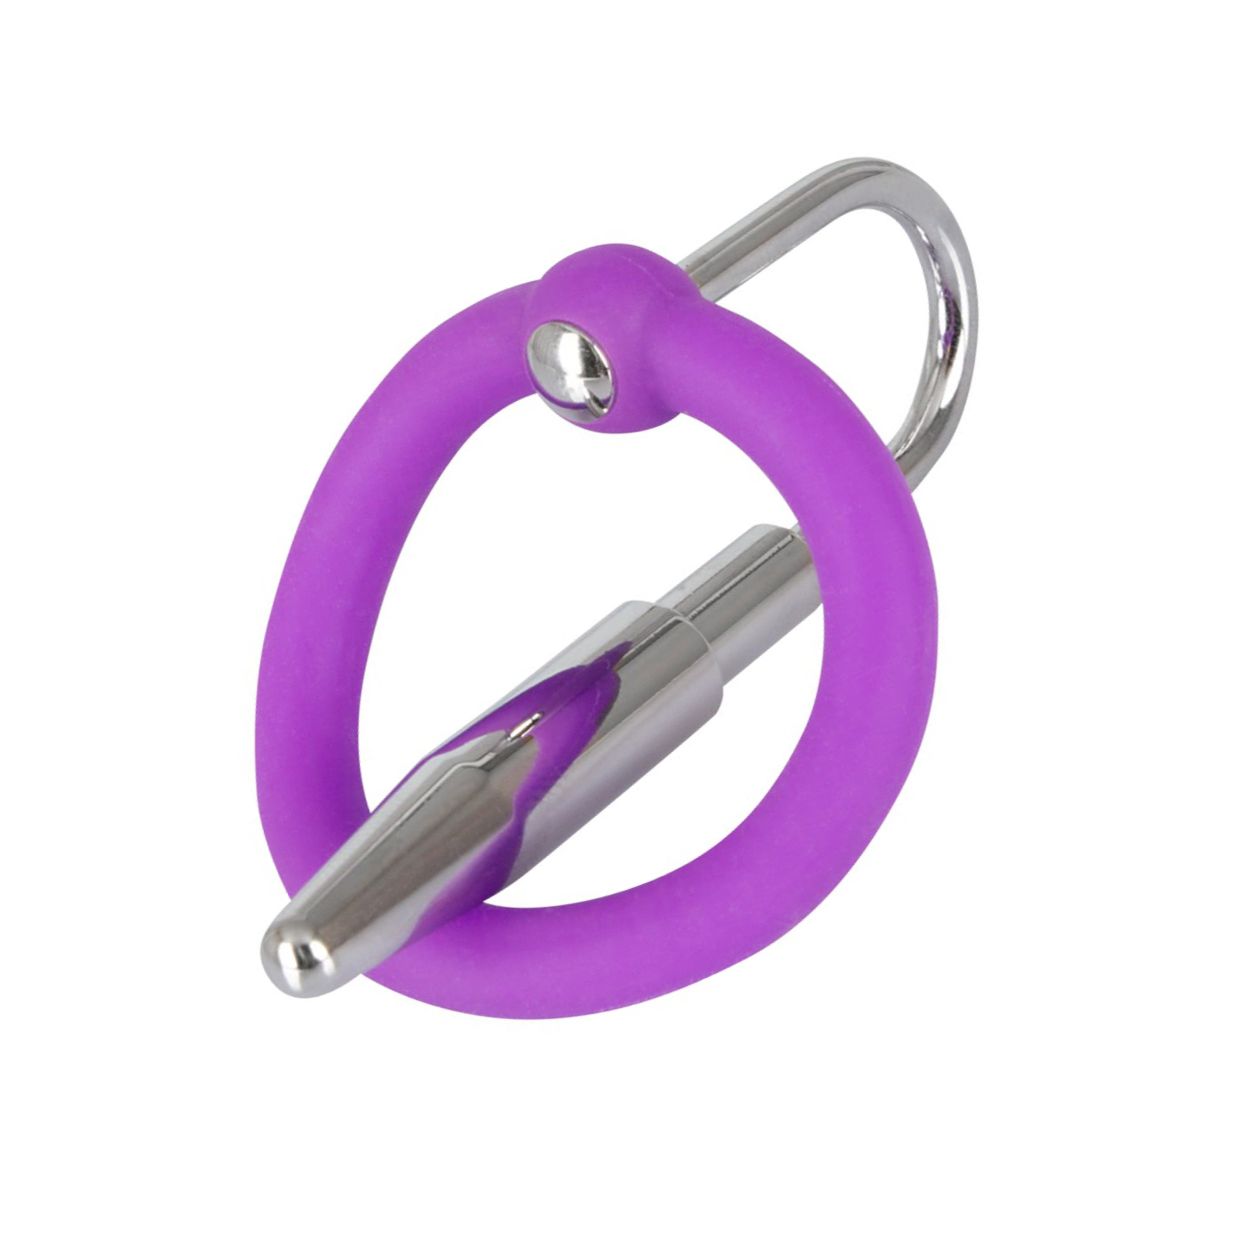 Penis Plug And Silicone Ring